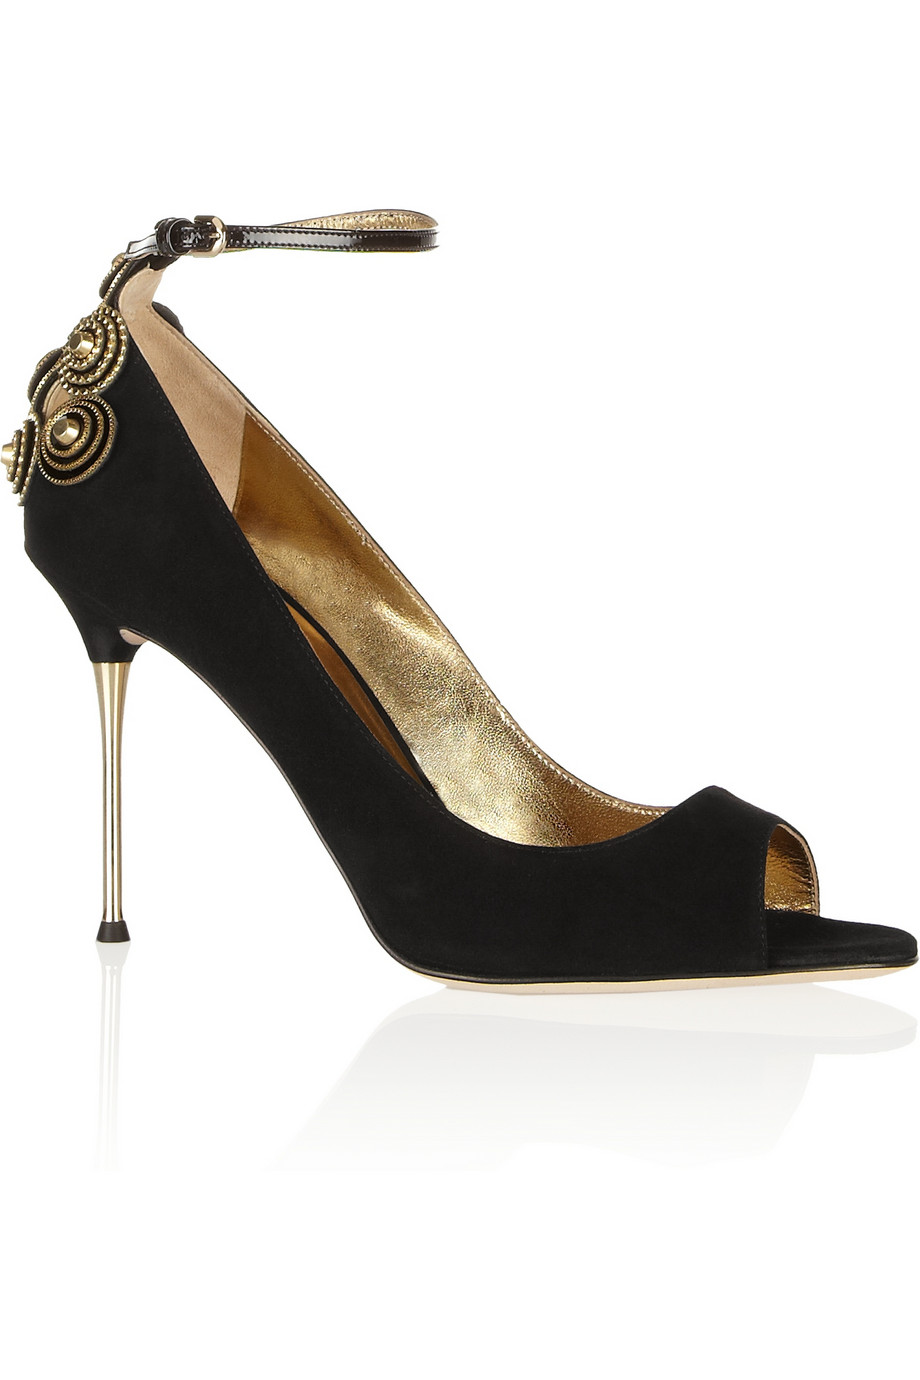 Brian Atwood Pda Embellished Suede Peeptoe Pumps in Black - Lyst